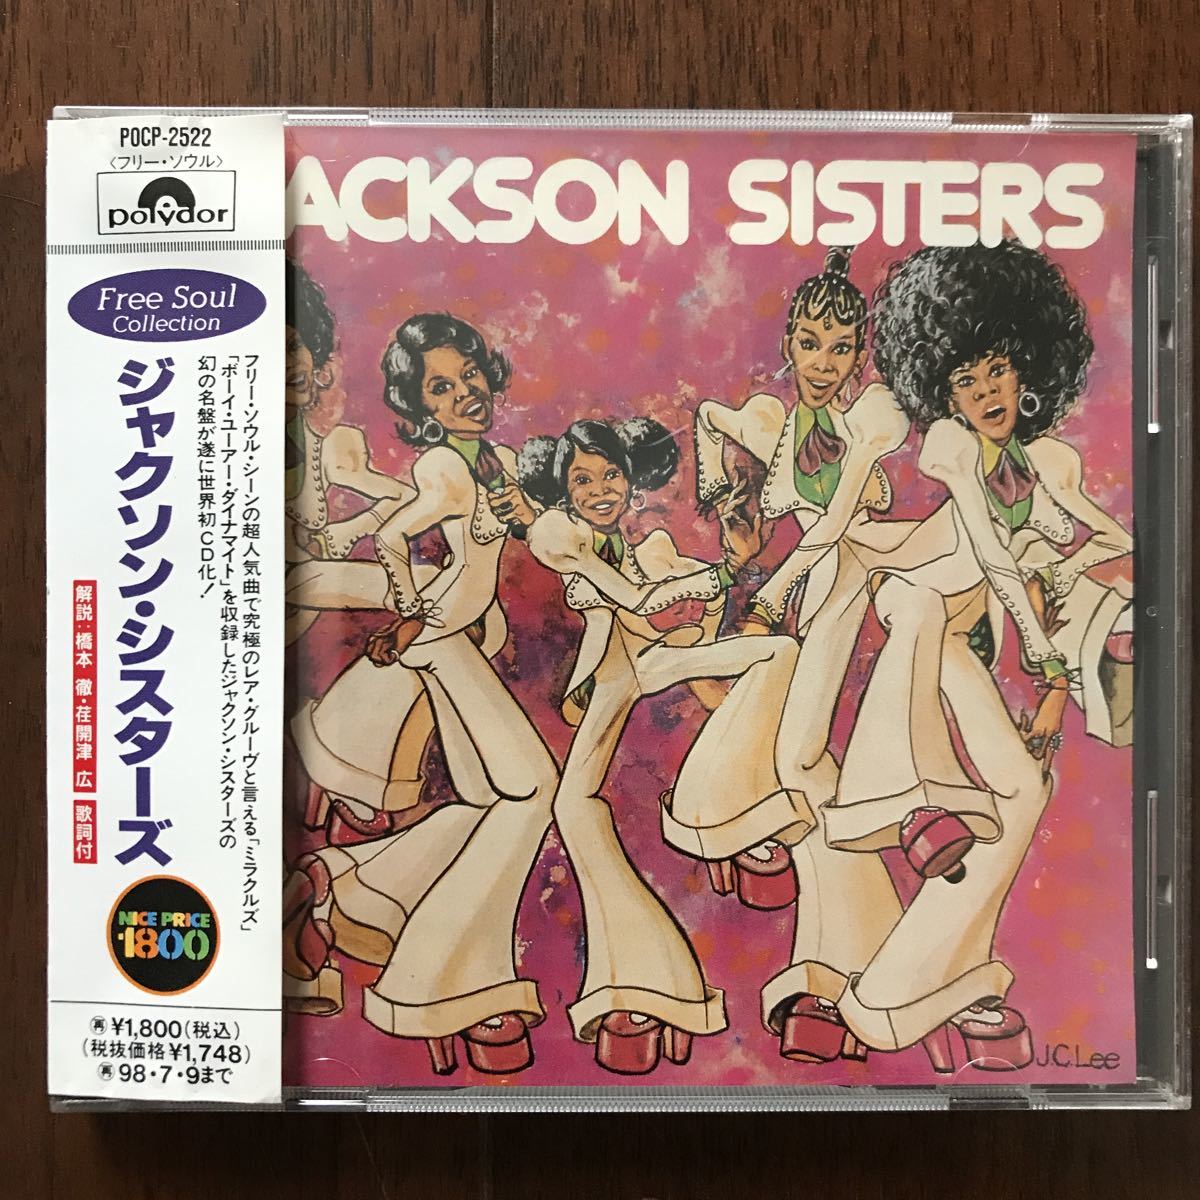 CD FREE SOUL COLLECTION JACKSON SISTERS 帯付 ジャクソン・シスターズ MIRACLES 解説:橋本徹_画像1